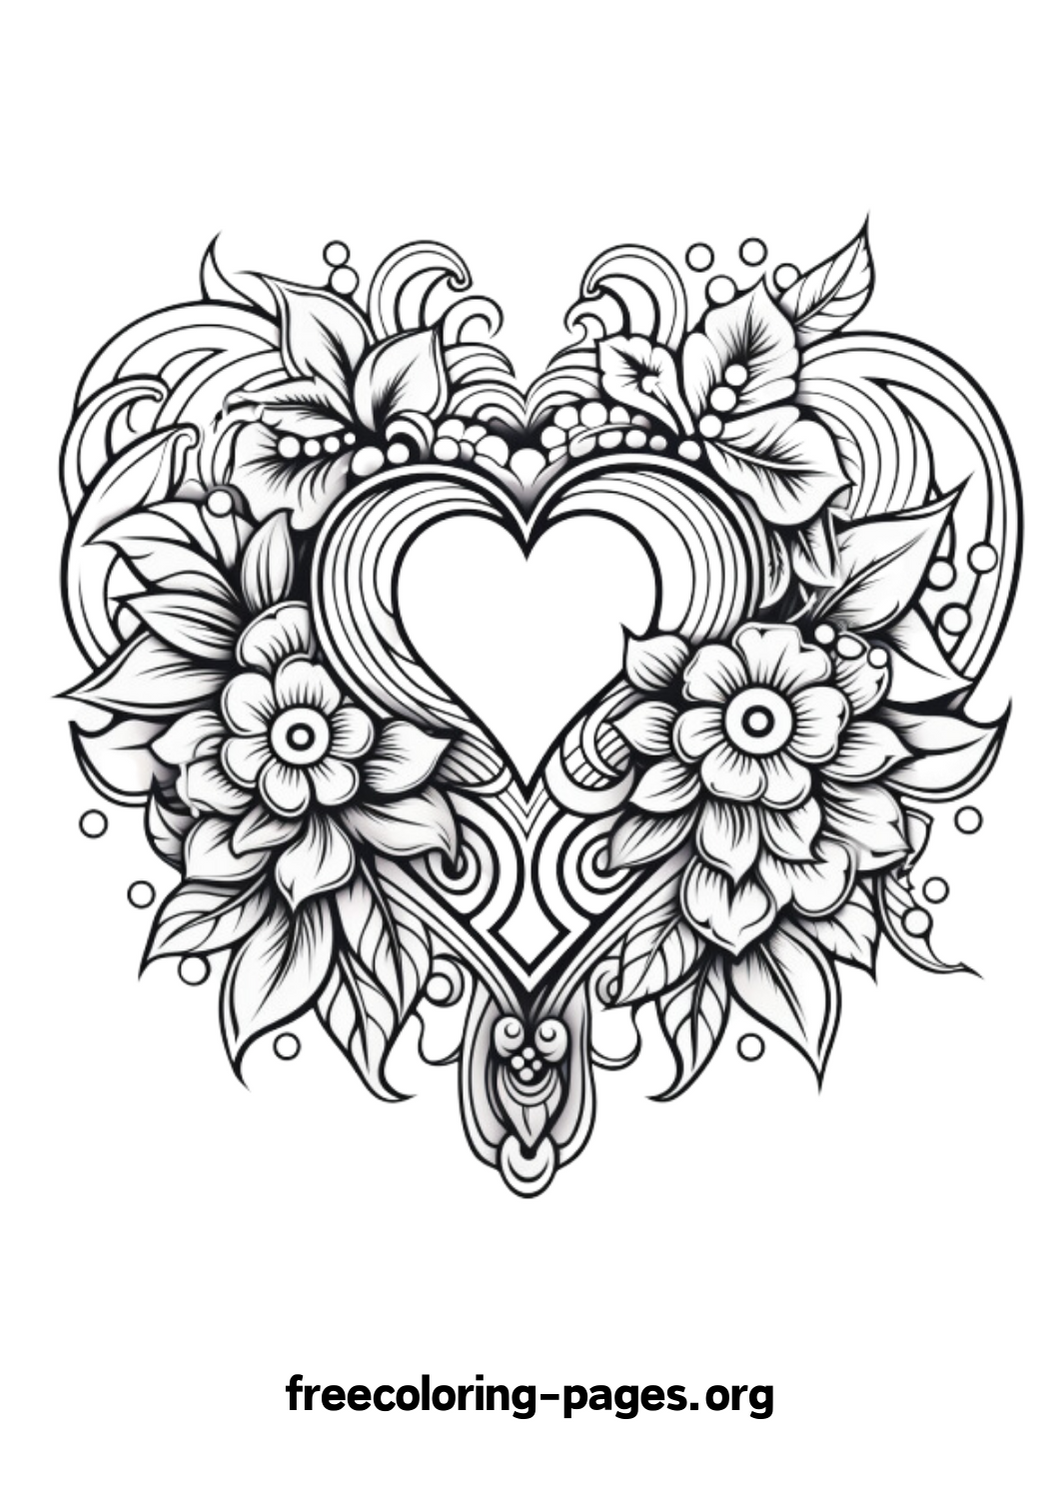 Valentine Day Coloring Pages: Valentine Cards, Cute Animals and Hearts ...